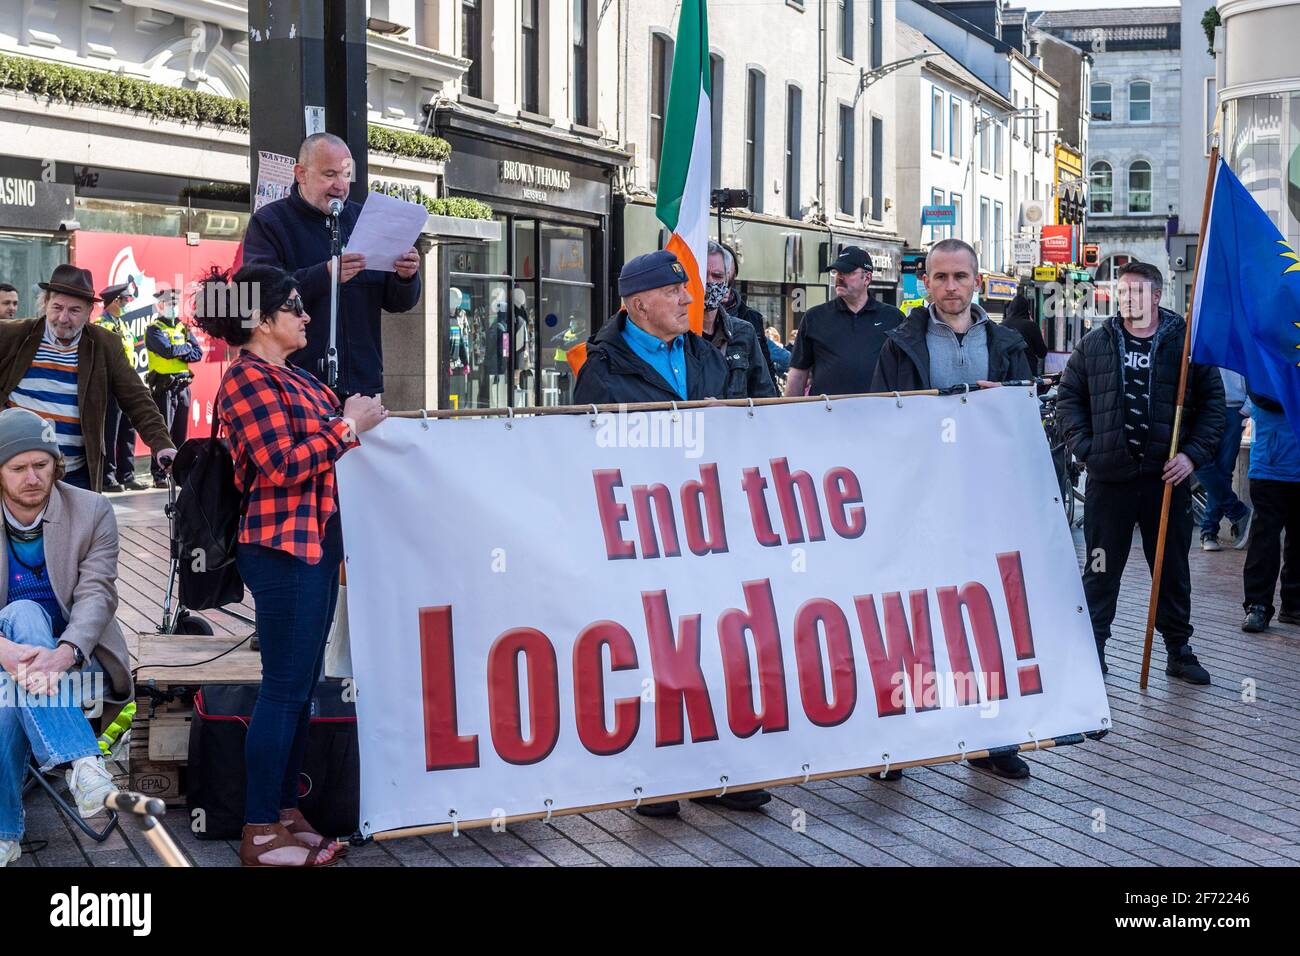 Cork, Ireland. 3rd Apr, 2021. An 'End the Lockdown' protest tokk place in Cork today, the second such event in the space of a month. Approximately 300 people attended in the midst of a heavy Garda presence. The protesters held a rally outside Brown Thomas on Patrick Street after the march. Protest organiser Diarmaid ' Cadhla spoke at the rally. Credit: AG News/Alamy Live News Stock Photo